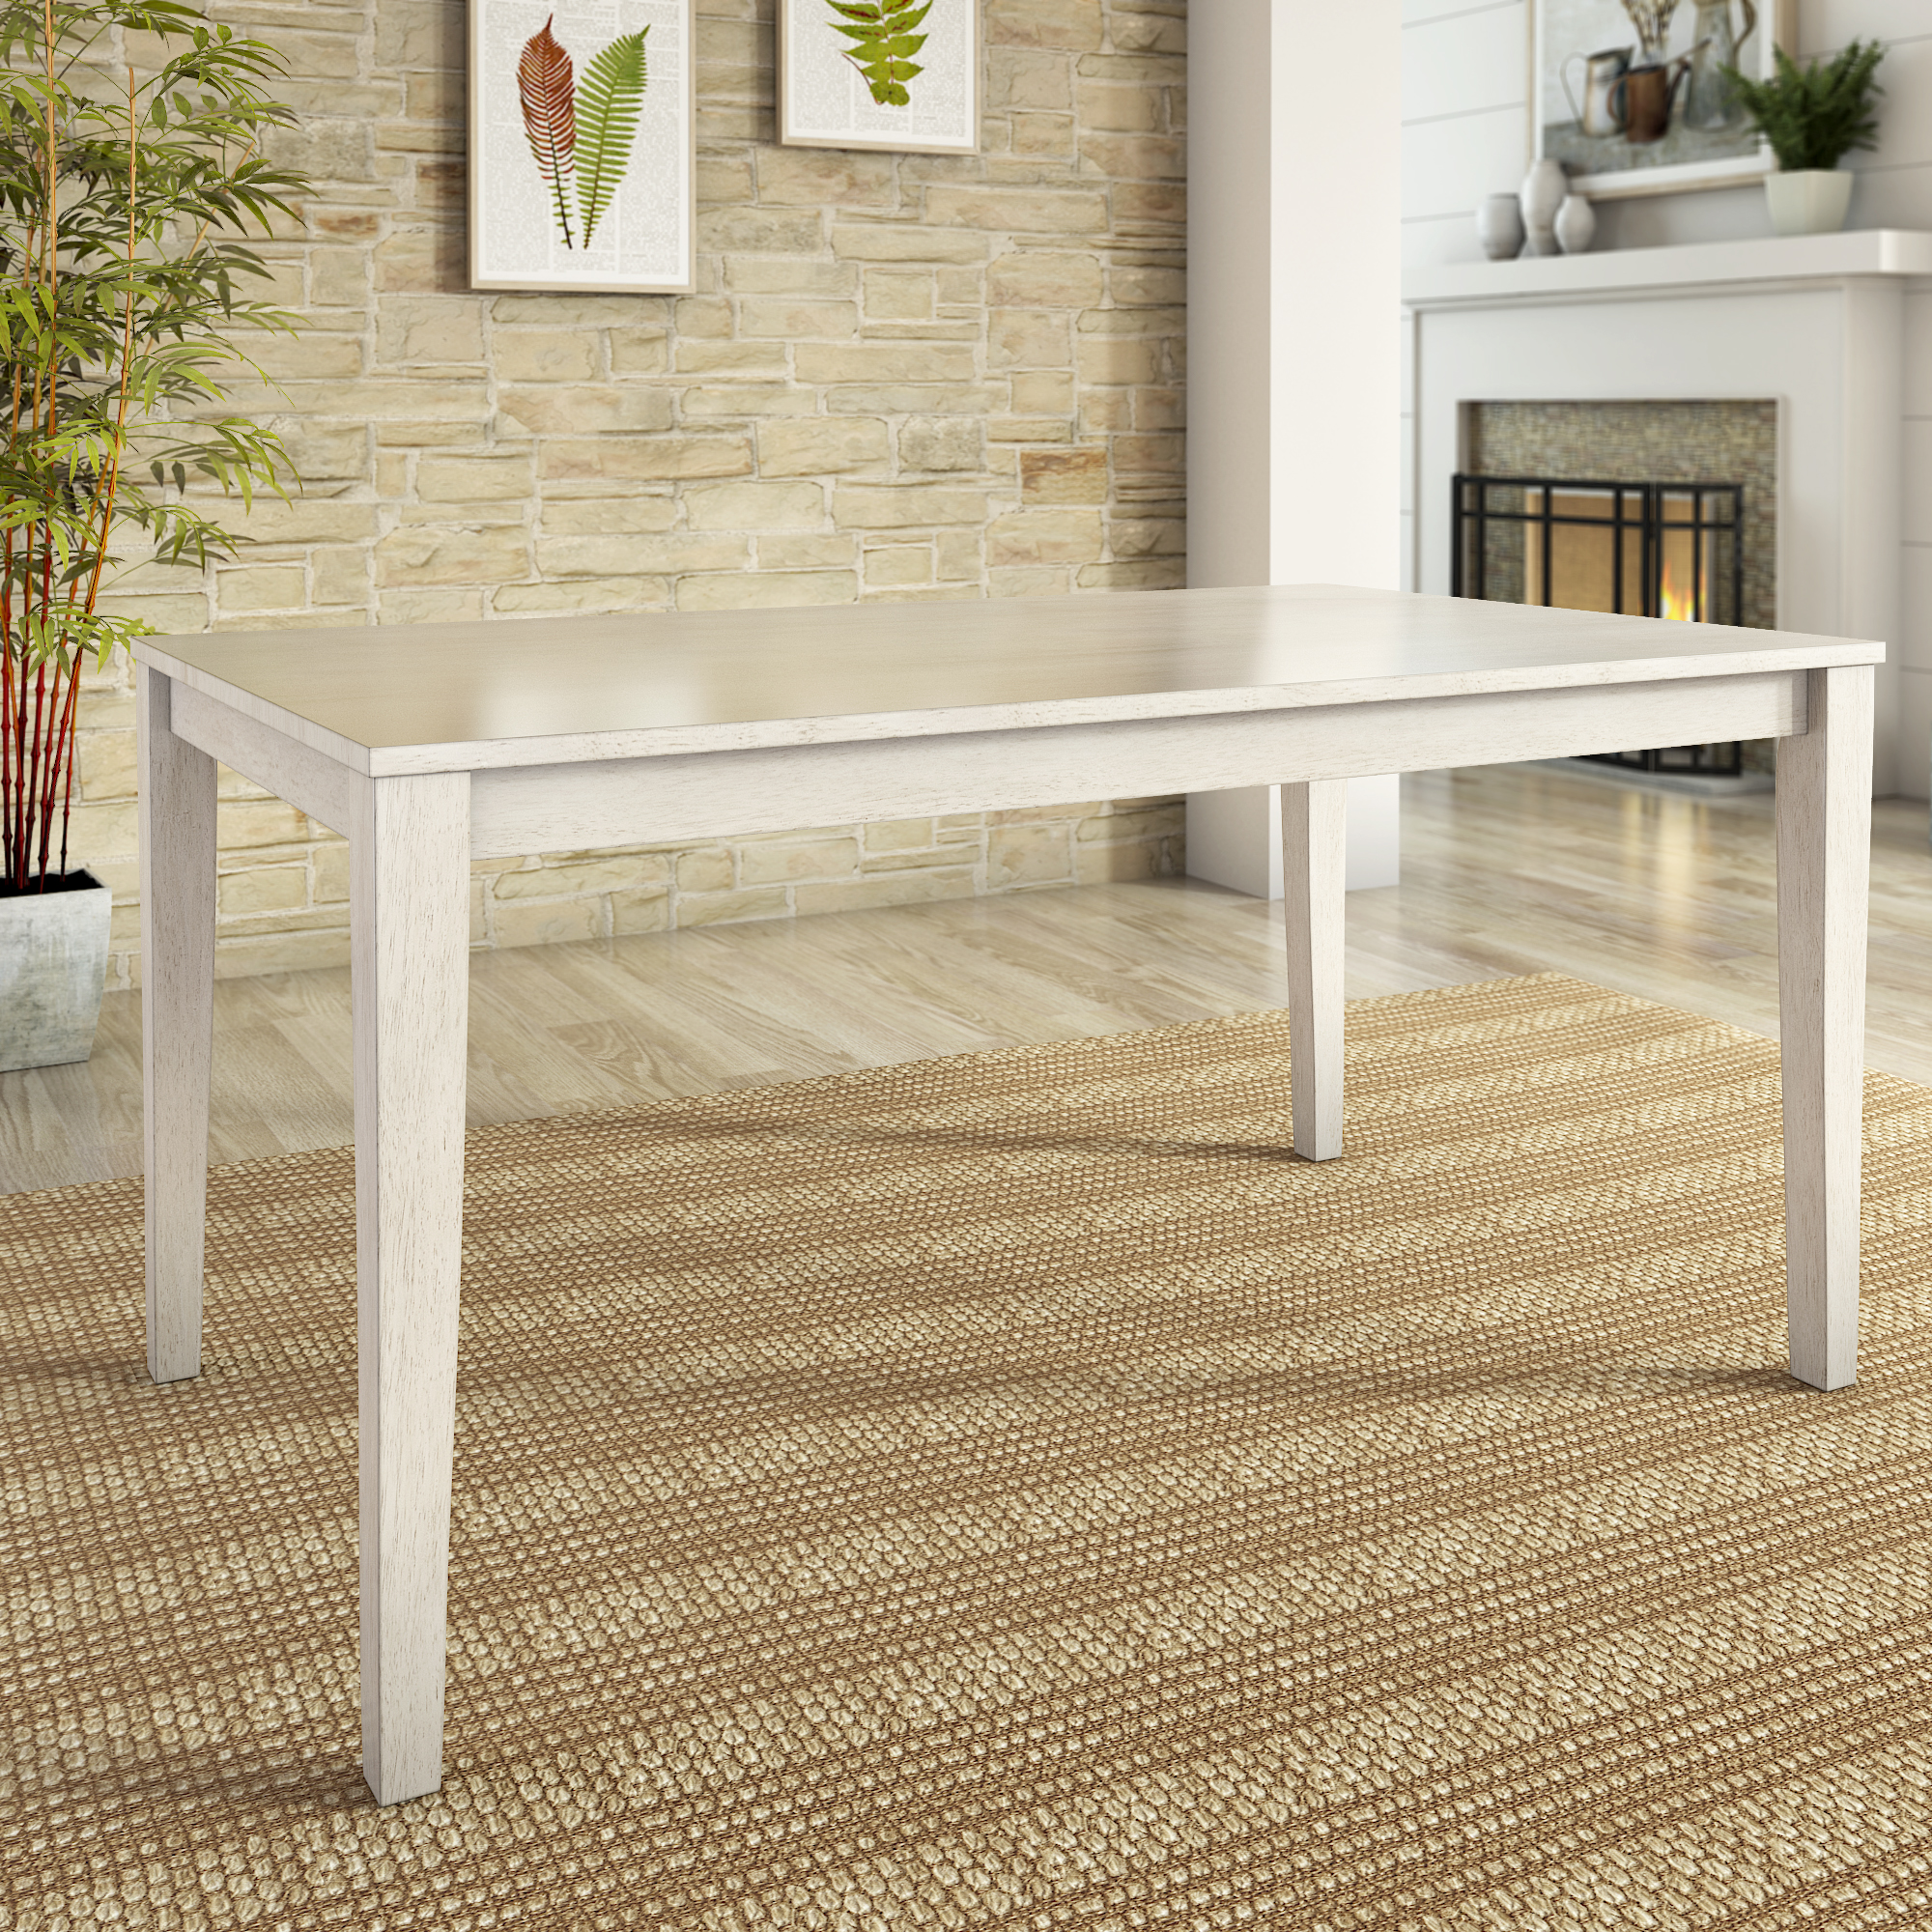 60-inch Rectangular Dining Table